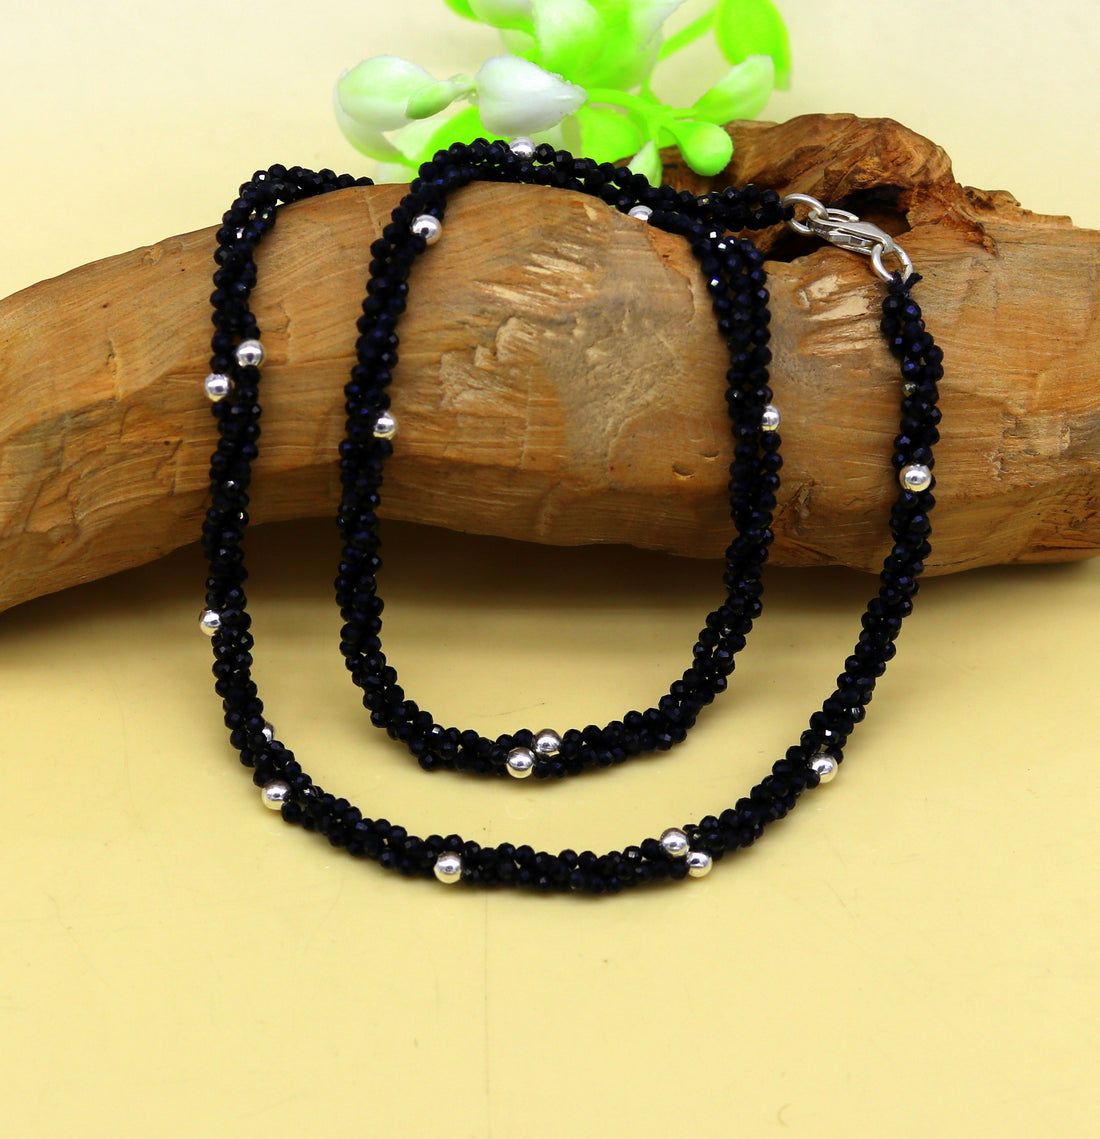 18" 925 pure silver galaxy necklace triple strands semi precious black cut stone beads with randomly placed silver beads necklace set135 - TRIBAL ORNAMENTS